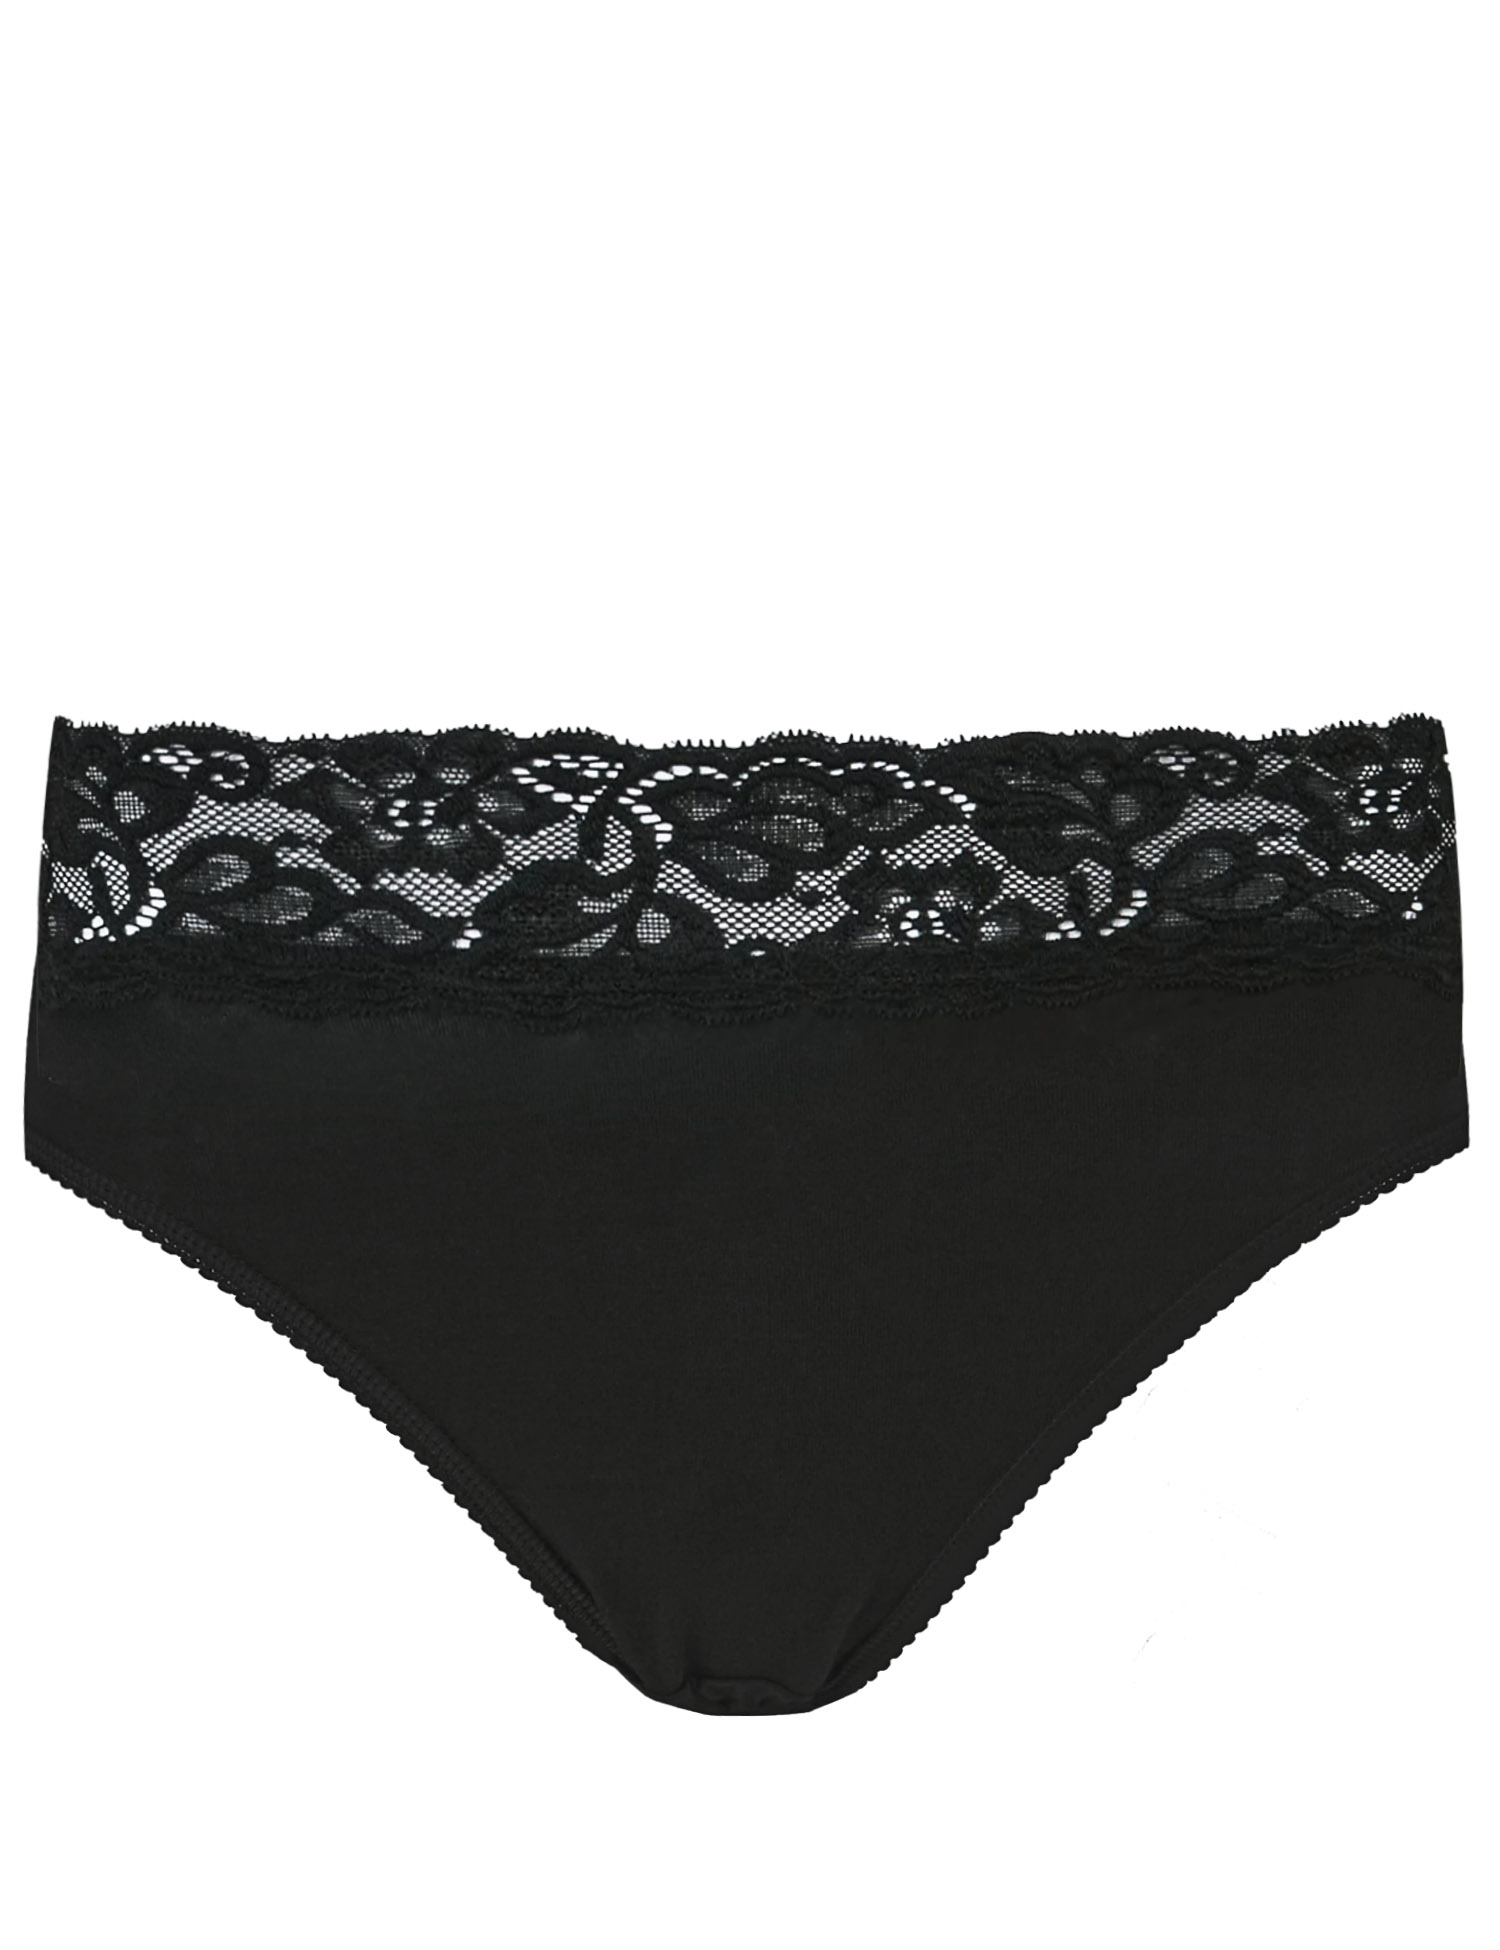  - - BLACK Cotton Rich Embroidery Lace Trim High Leg Knickers